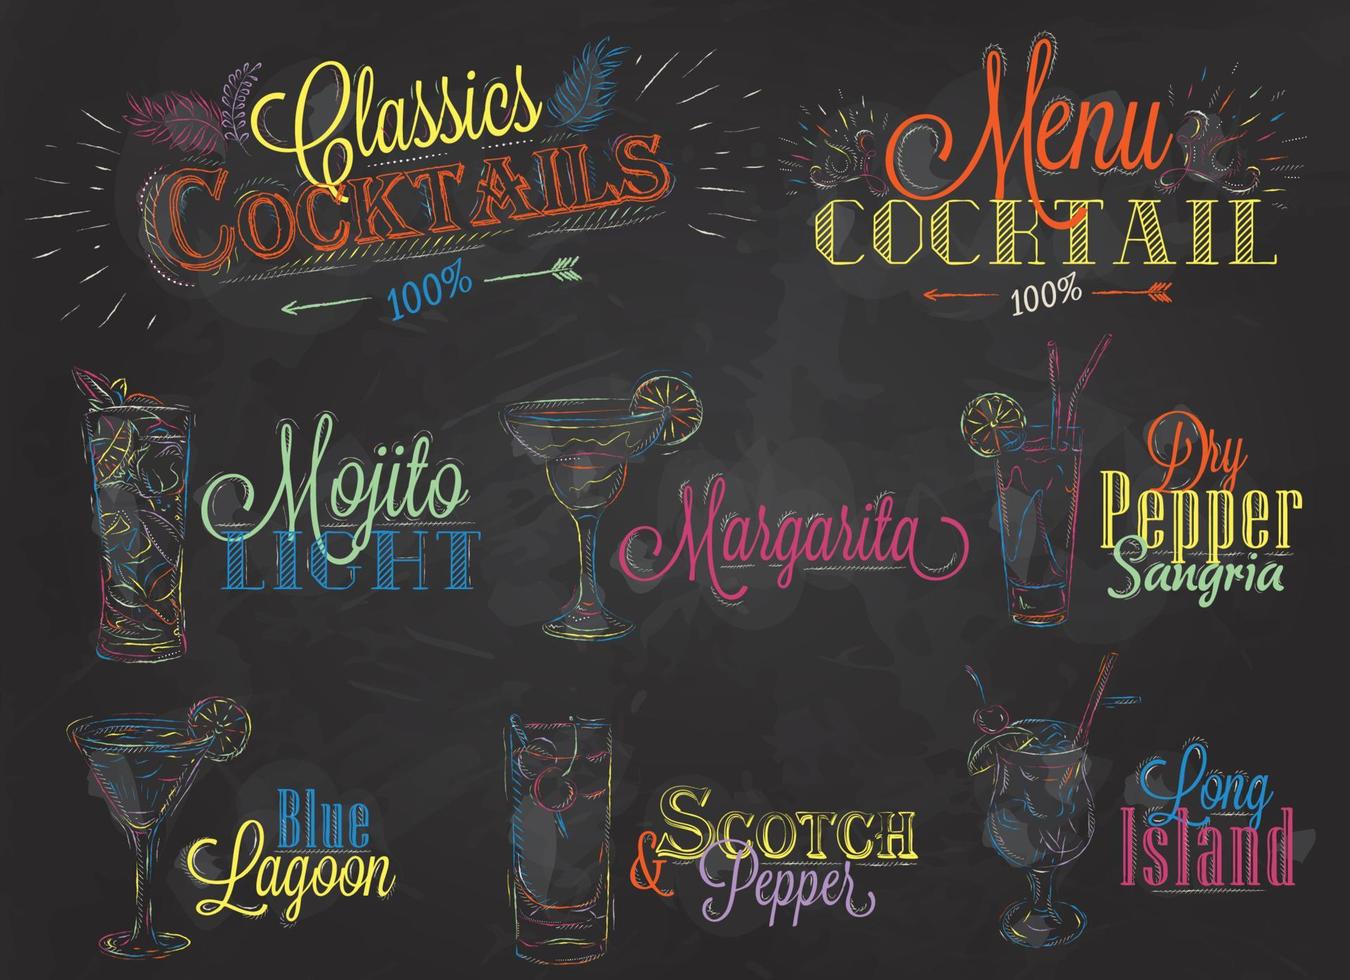 Set of cocktail menu in vintage style stylized drawing of colored chalk on a school blackboard, Mojito cocktails with illustrated, the blue lagoon margarita Scotch vector